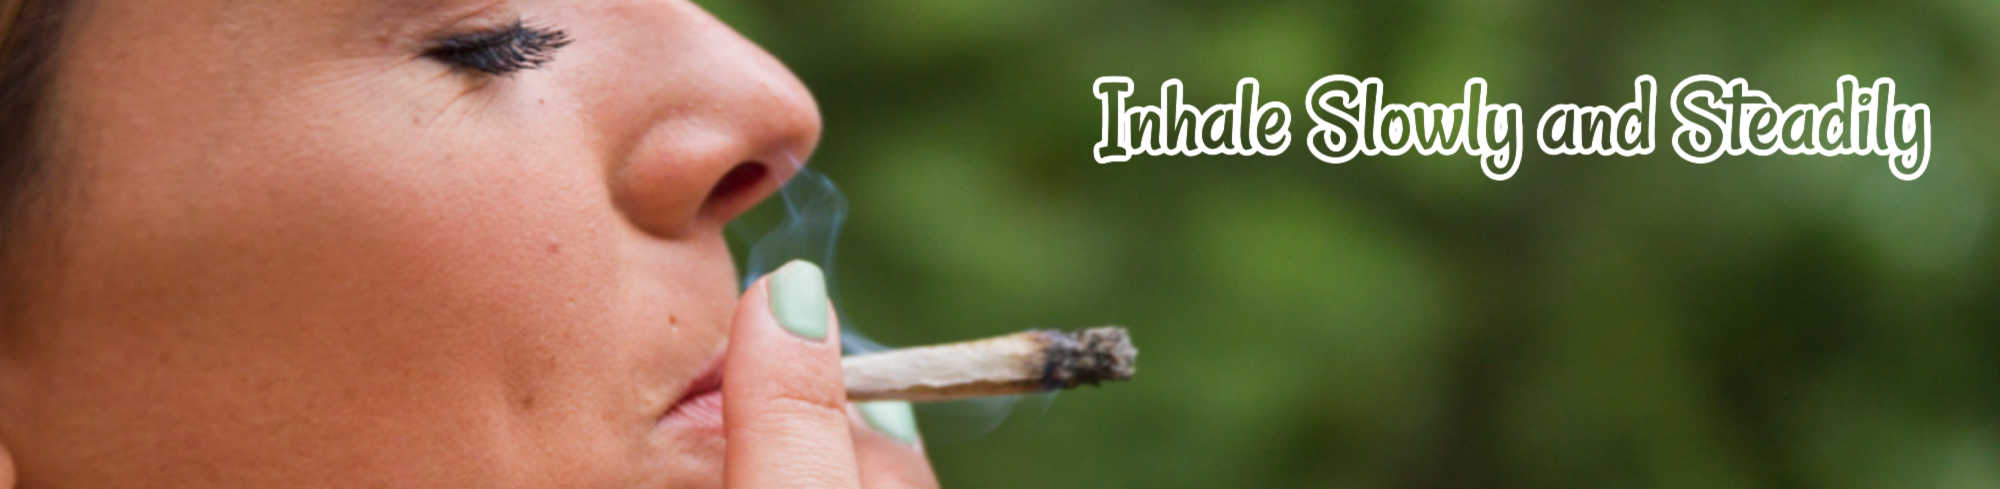 image of inhale pre roll joint slowly and steadily